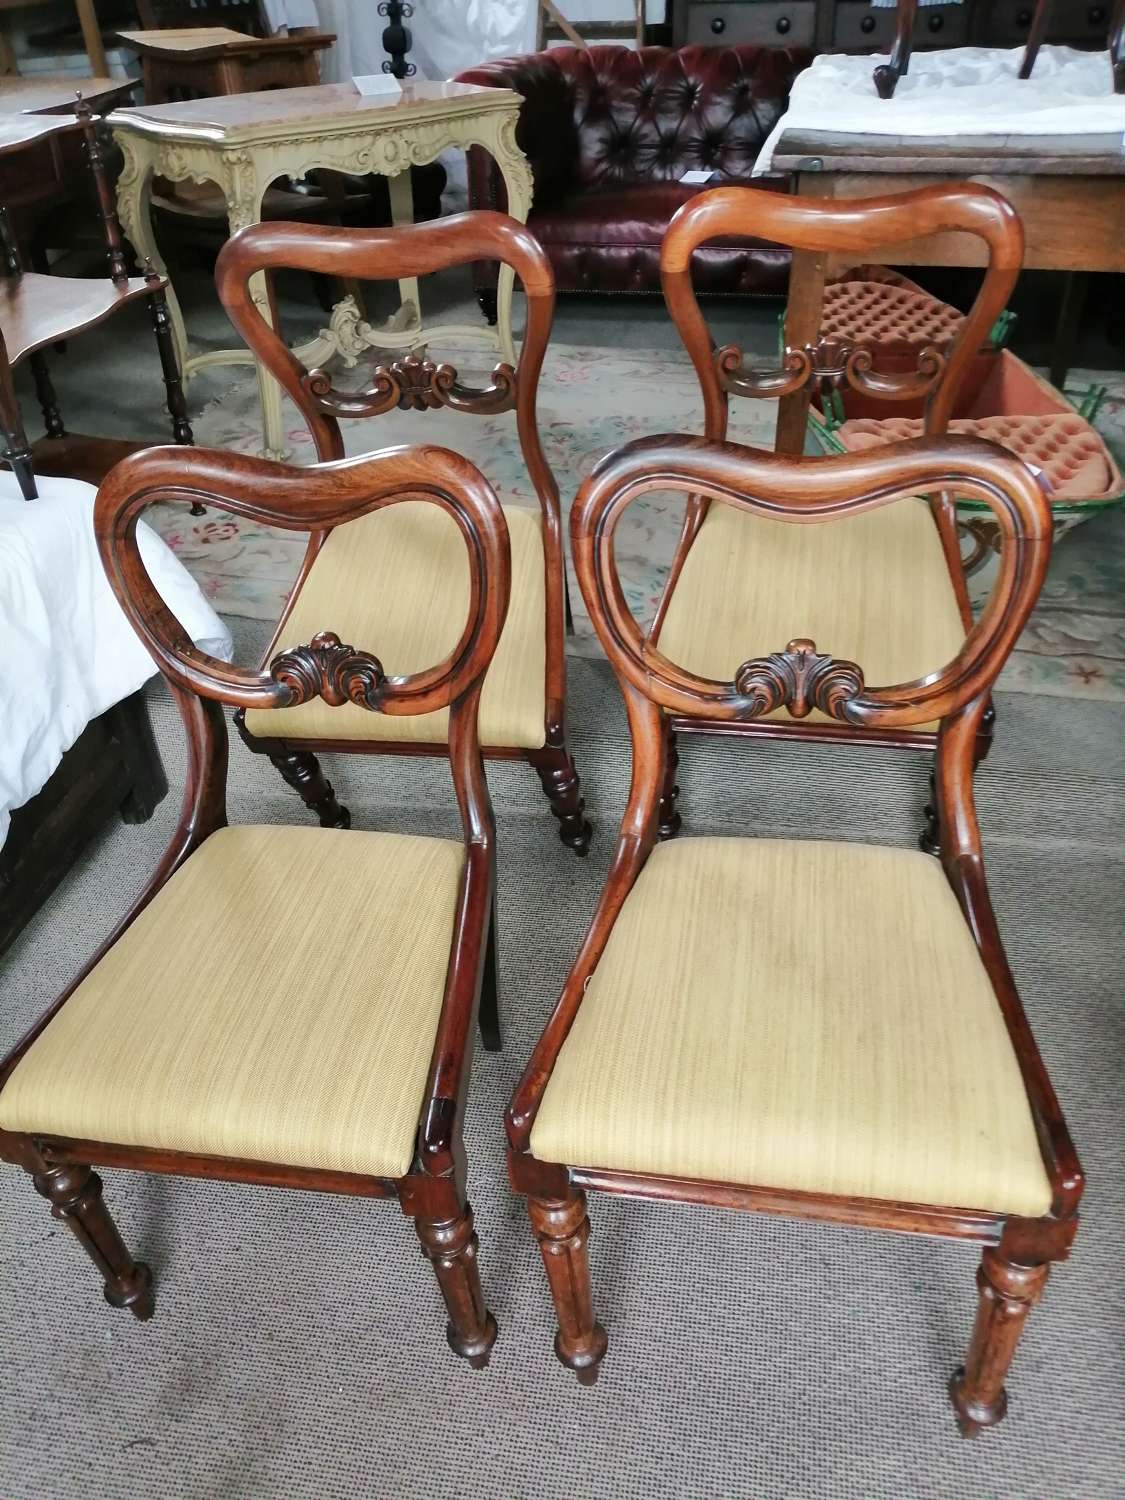 A fine quality set of 4 William IV dining chairs